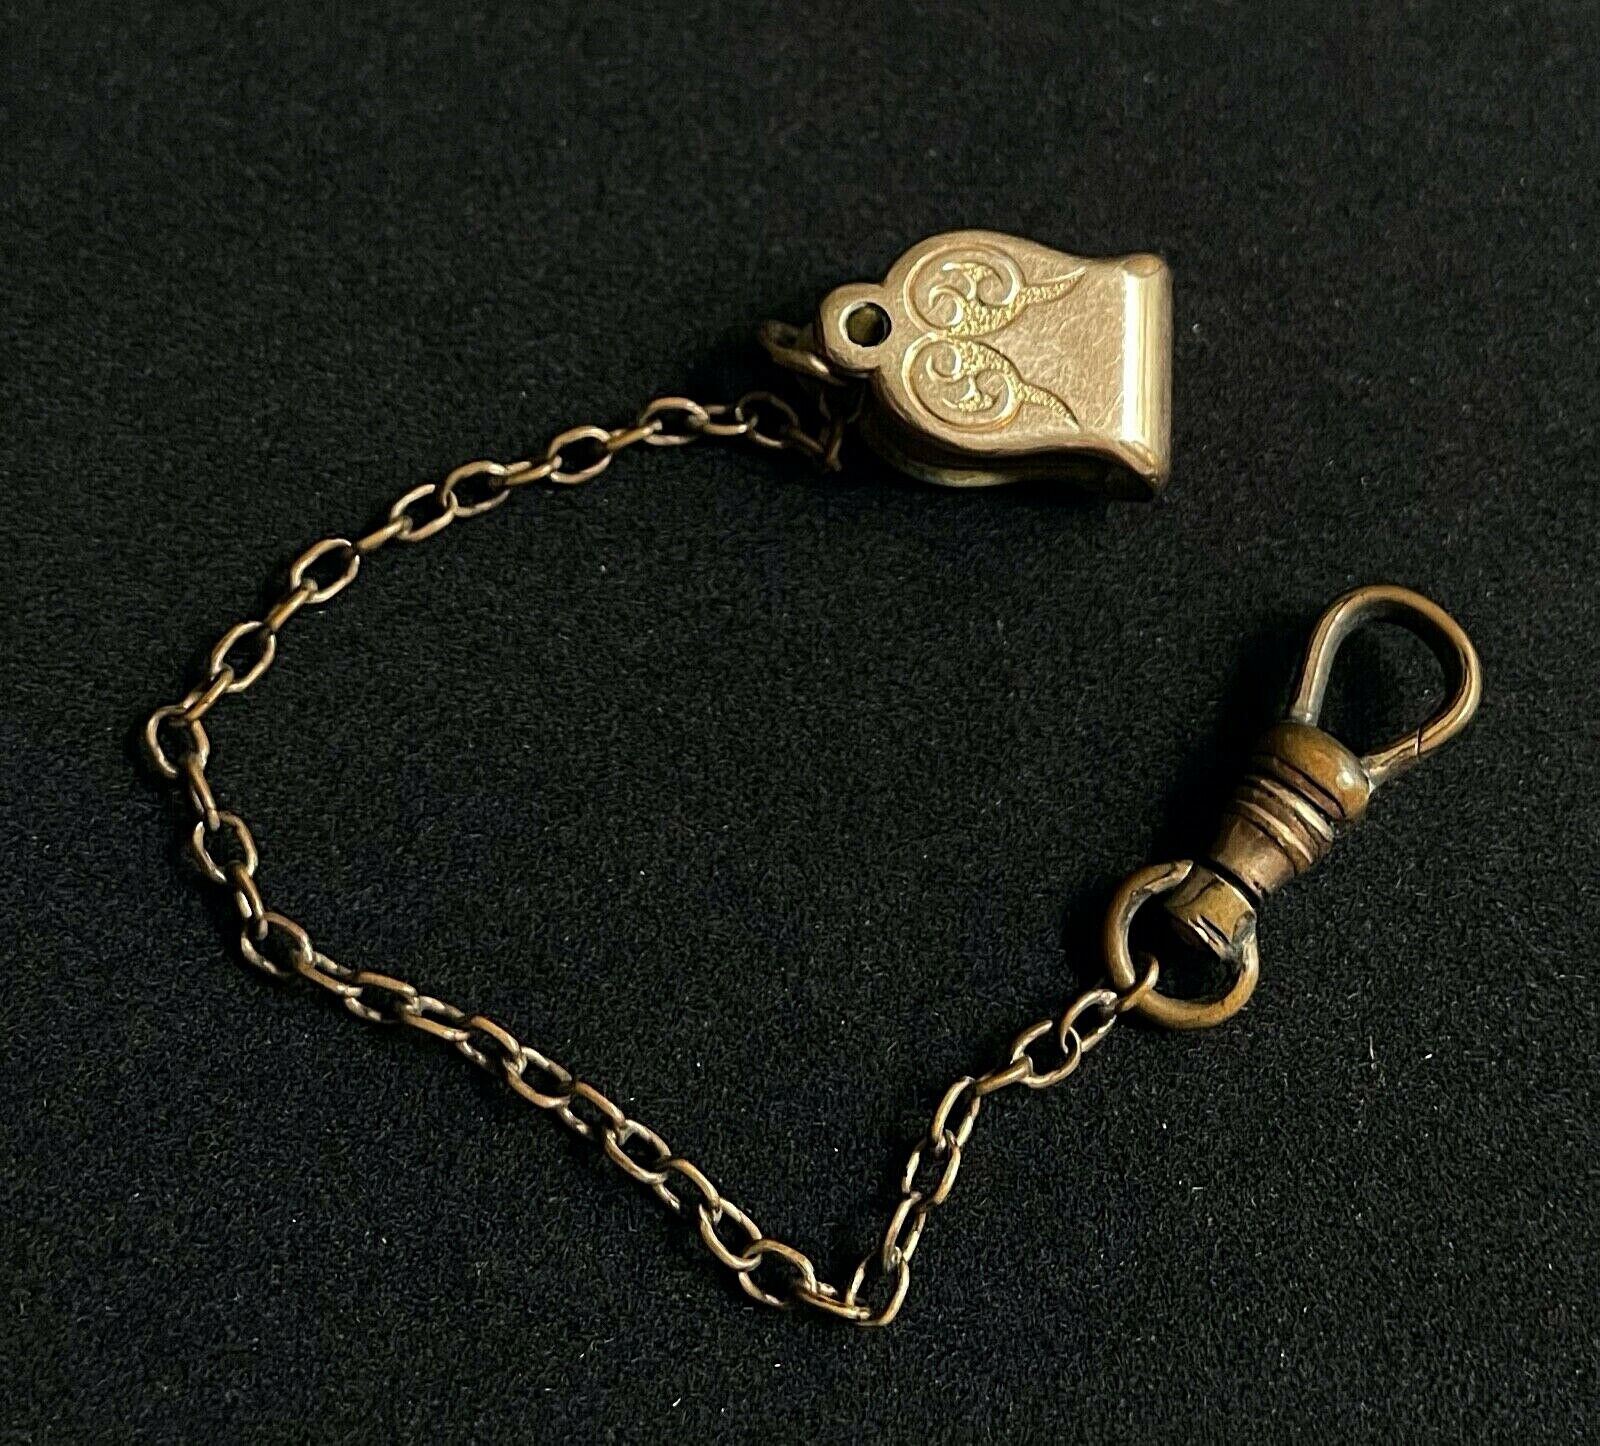 Antique Gold Filled Watch Chain Fob Clip Dated Dec 8 1903  5 1/2" M09